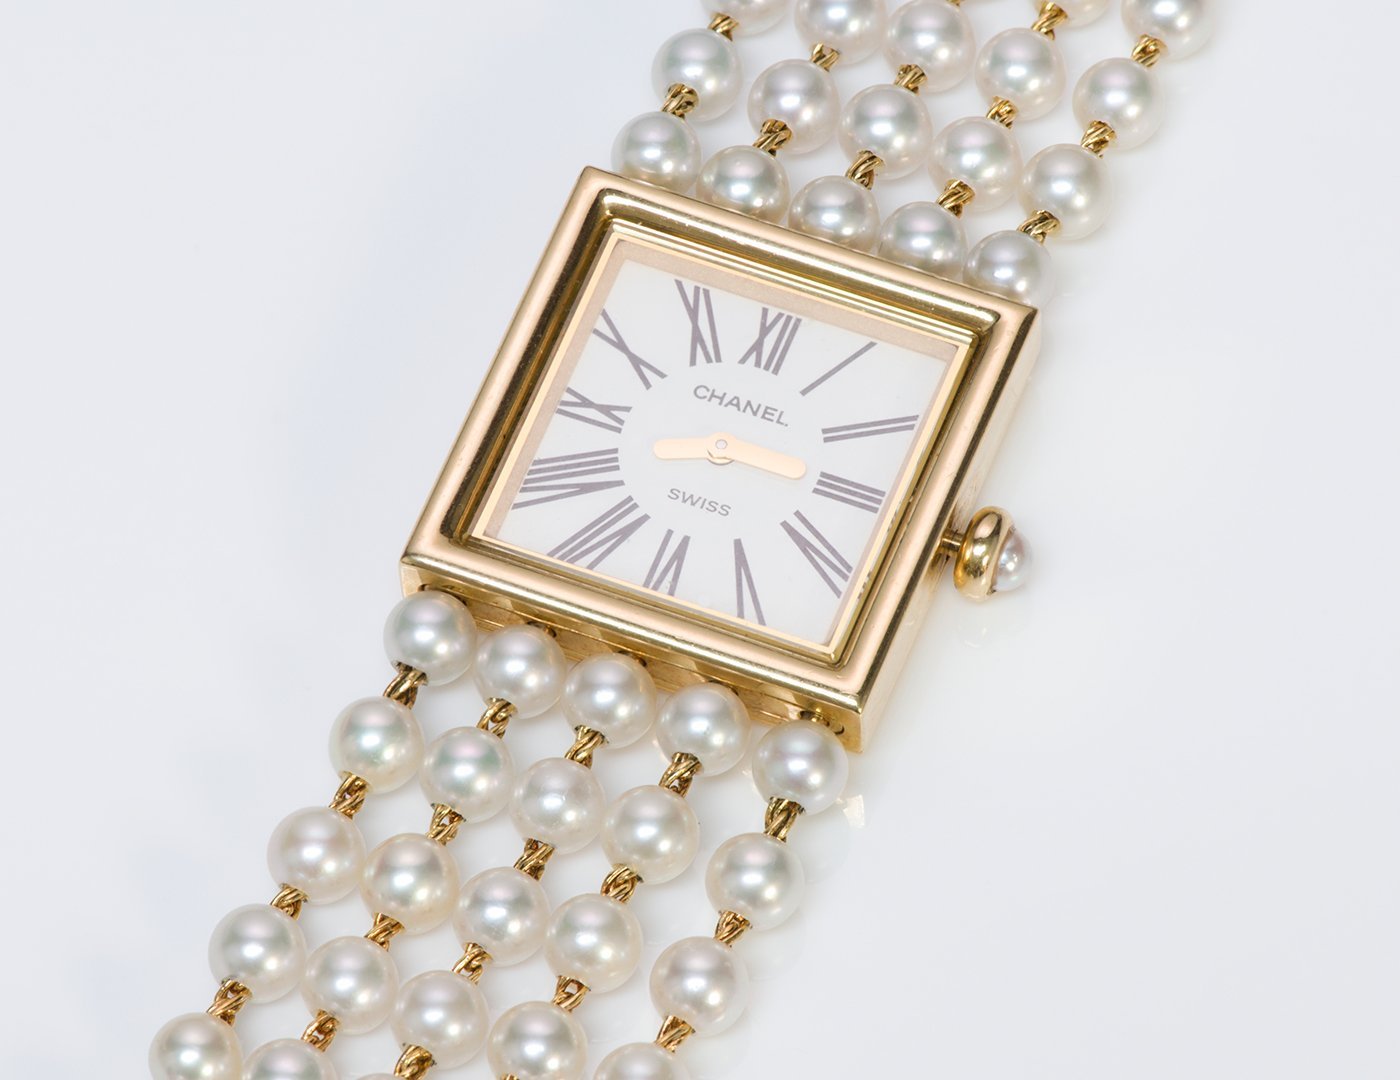 Chanel Mademoiselle 18K Gold Akoya Pearl Watch - DSF Antique Jewelry